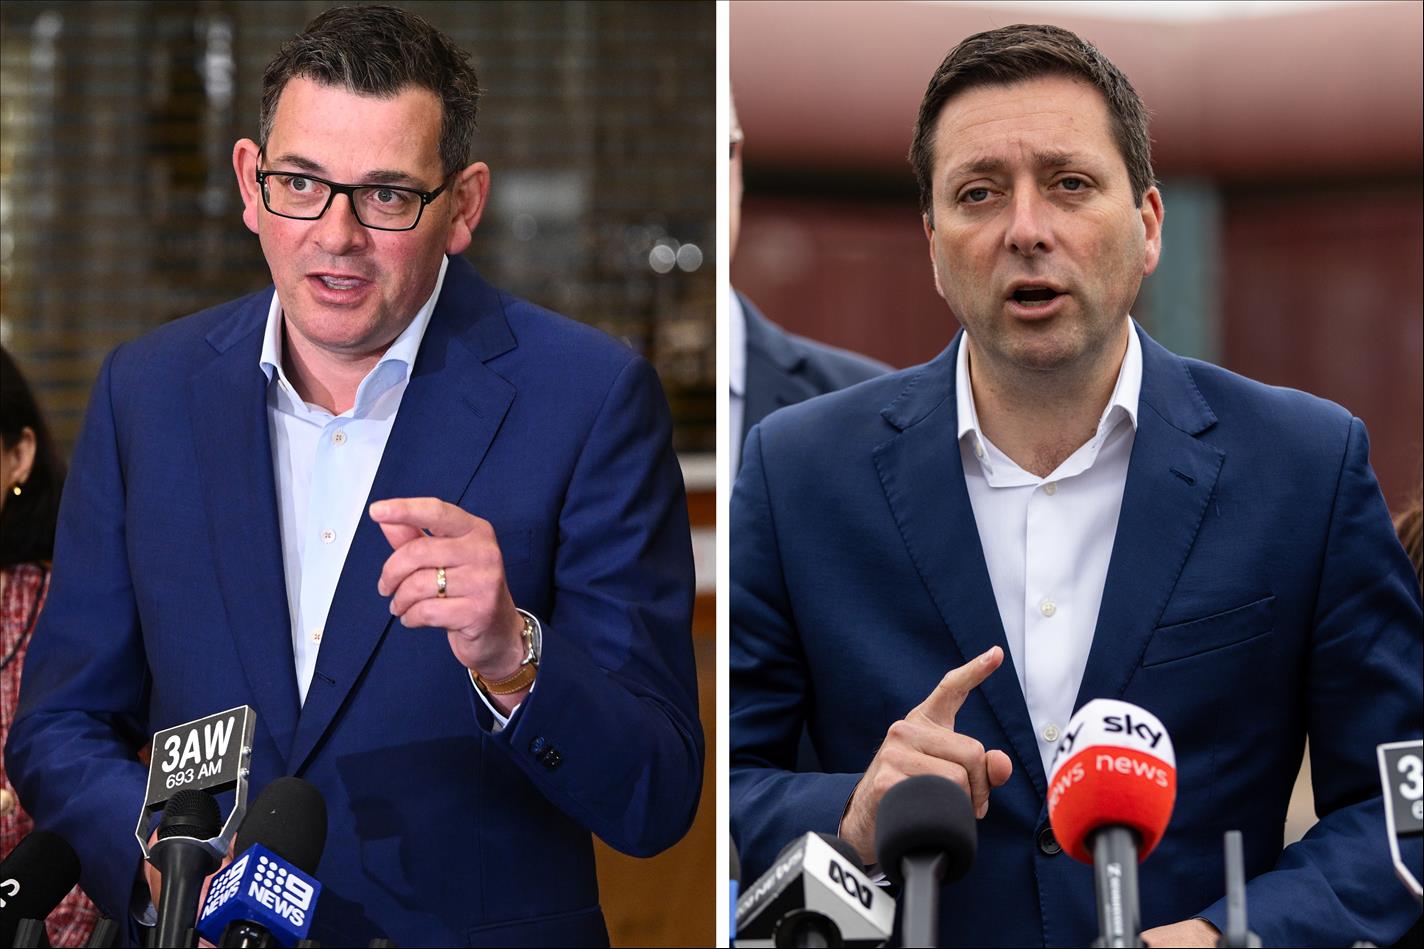 Media Go For Drama On Victorian Election - And Miss The Story